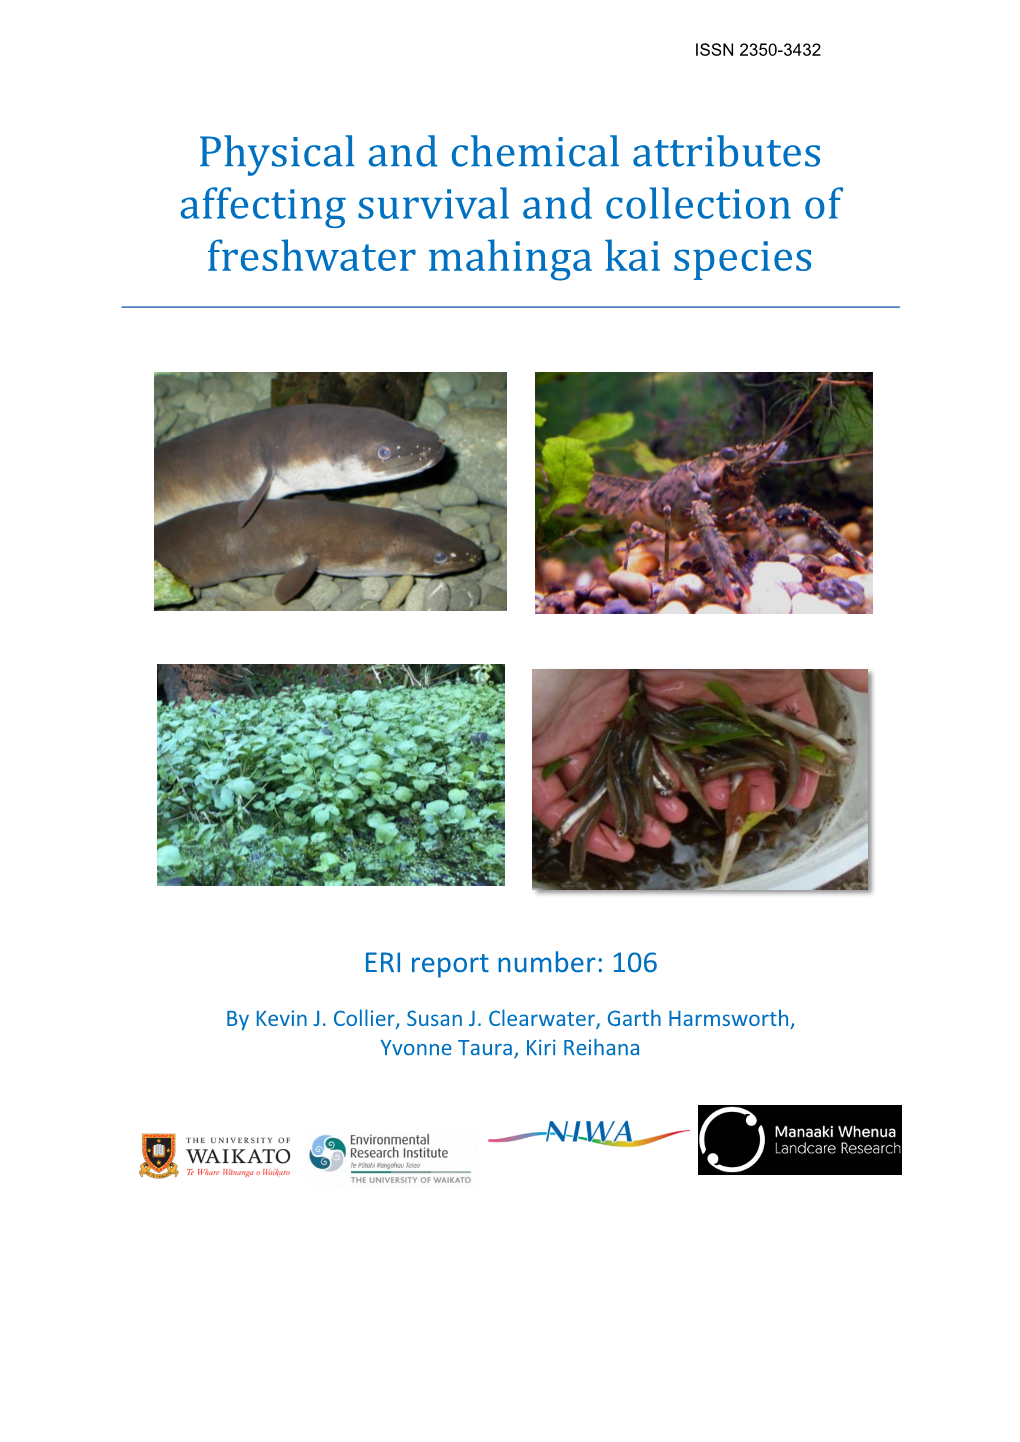 Physical and Chemical Attributes Affecting Survival and Collection of Freshwater Mahinga Kai Species